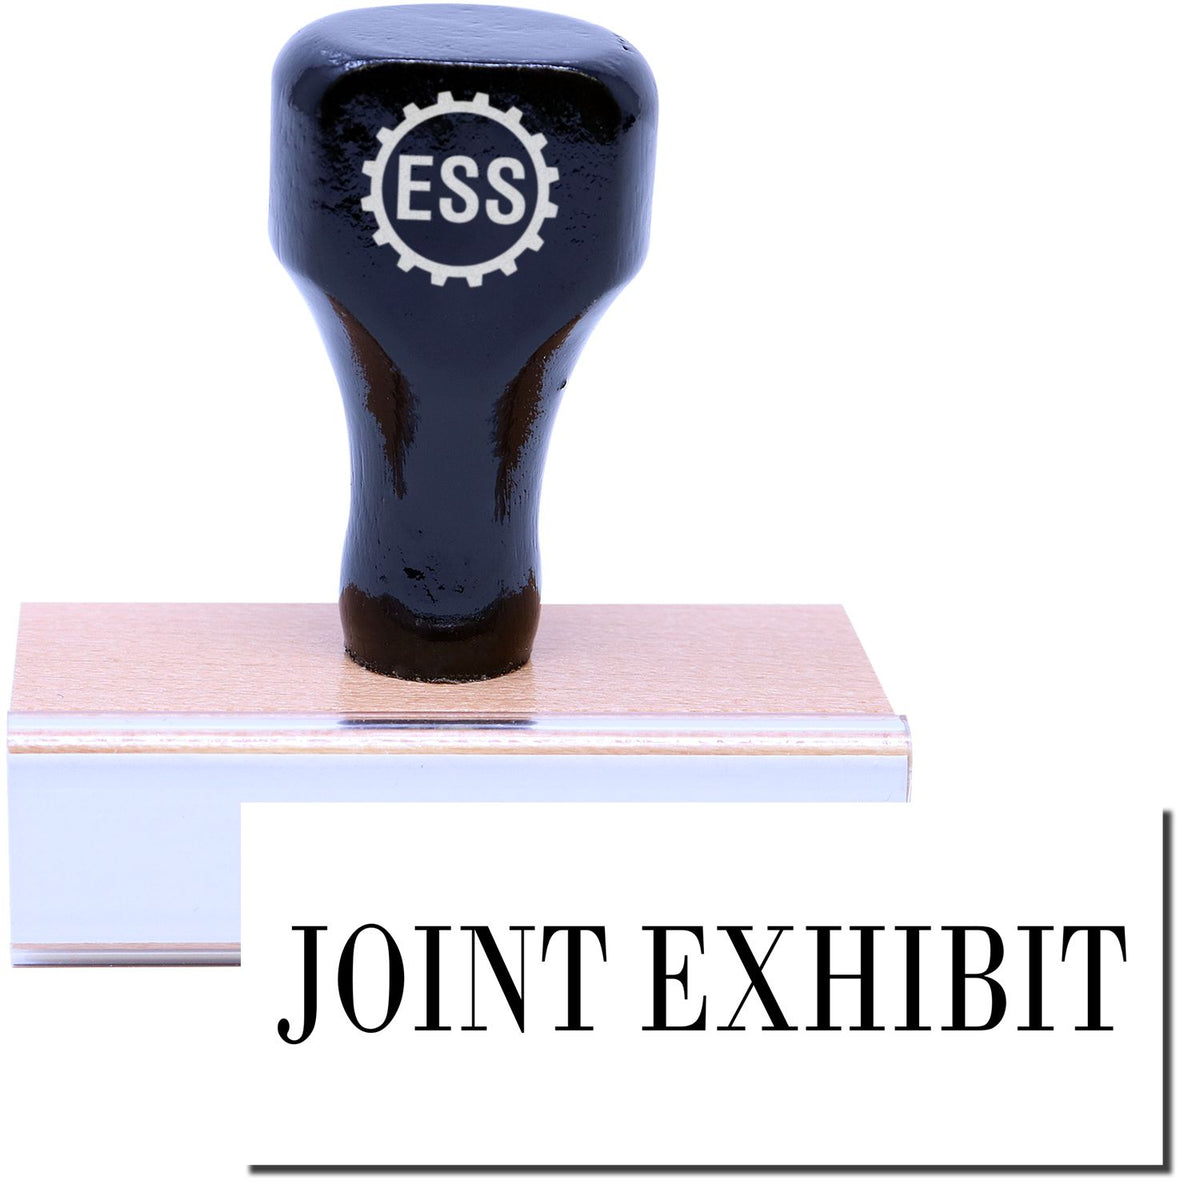 A stock office rubber stamp with a stamped image showing how the text &quot;JOINT EXHIBIT&quot; is displayed after stamping.